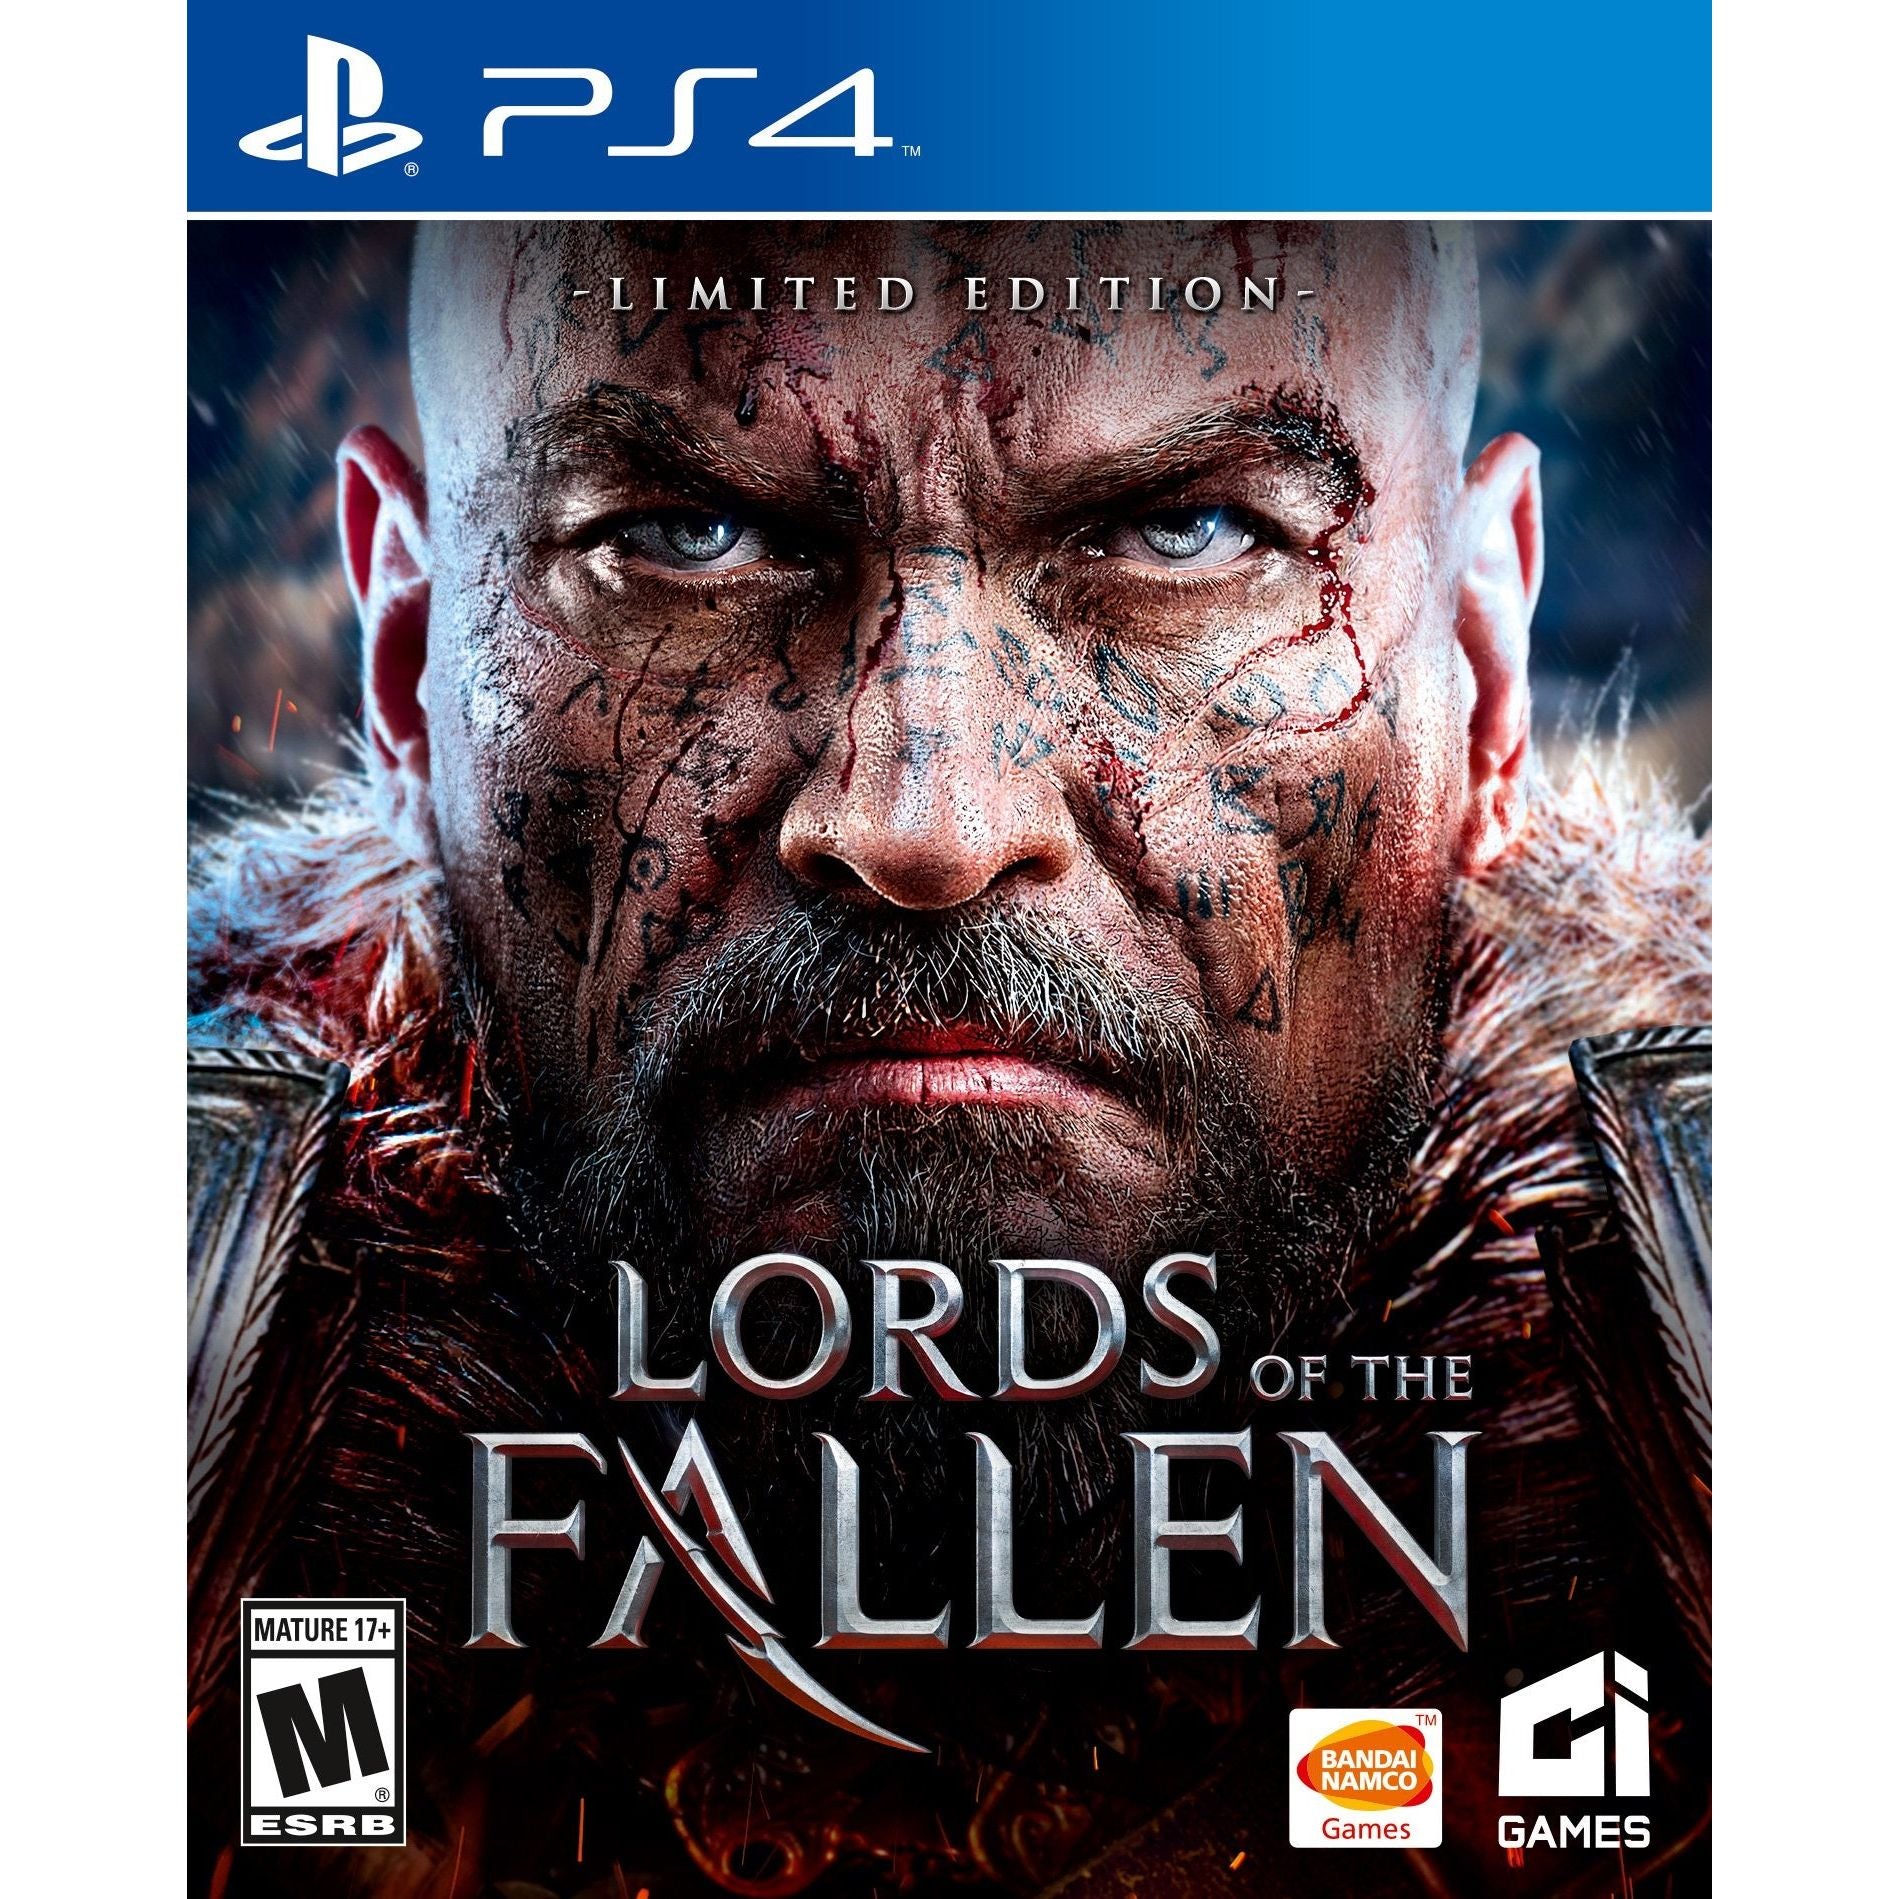 PS4 - Lords of the Fallen Limited Edition